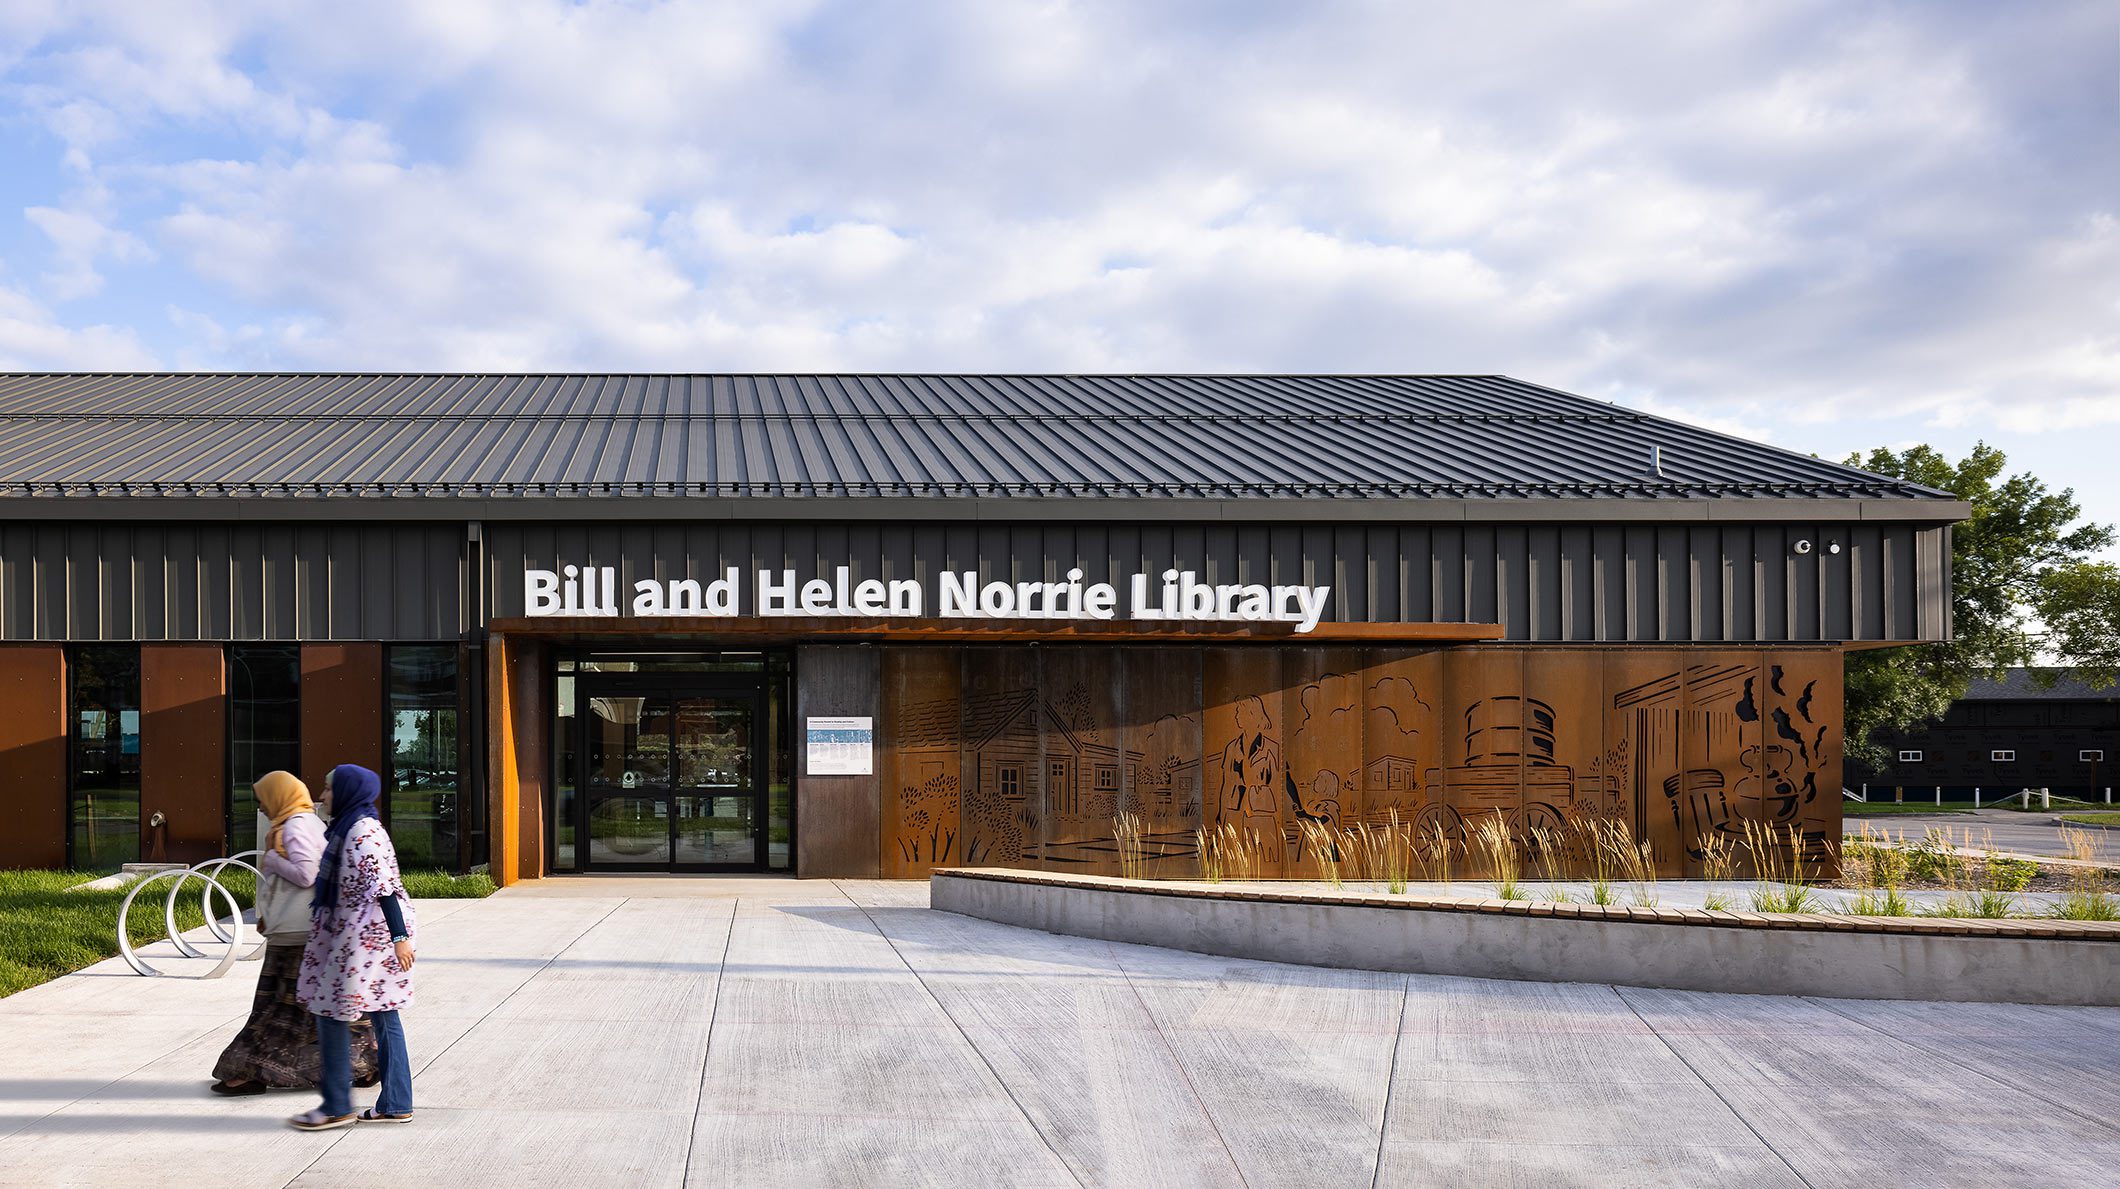 North entrance of Bill and Helen Norrie Library with community members in front.